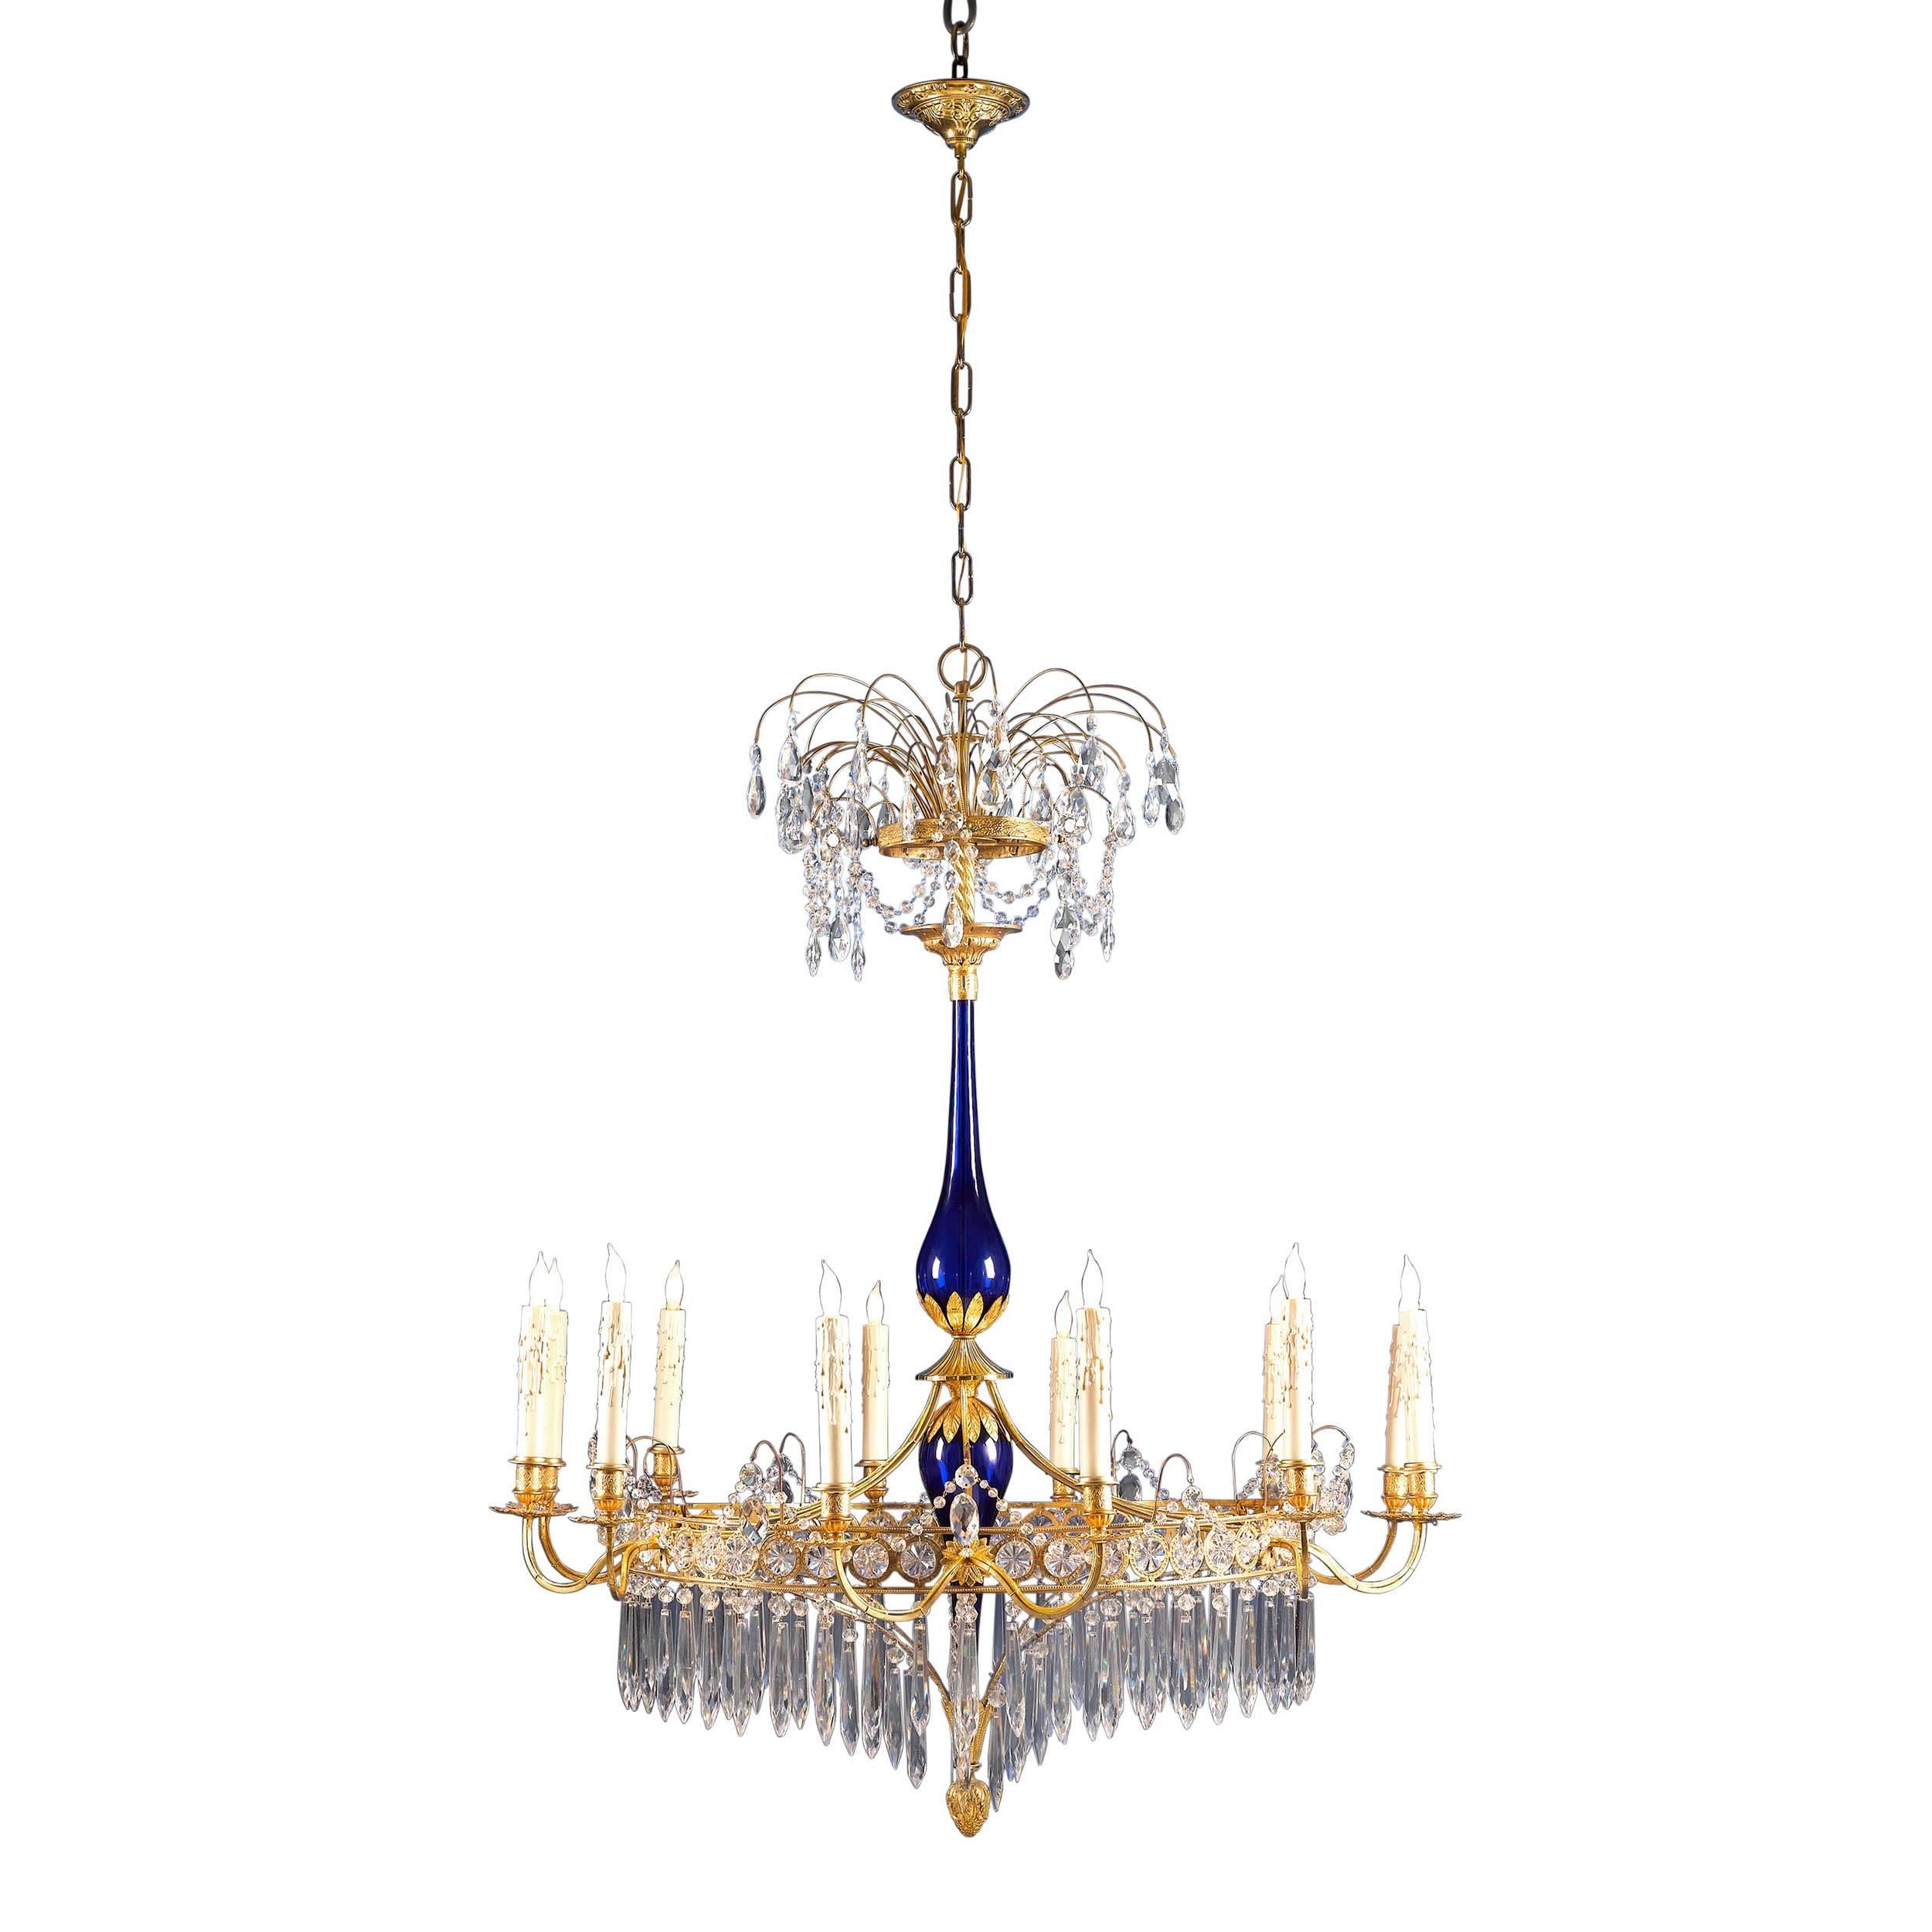 Russian Neoclassical Crystal Chandelier